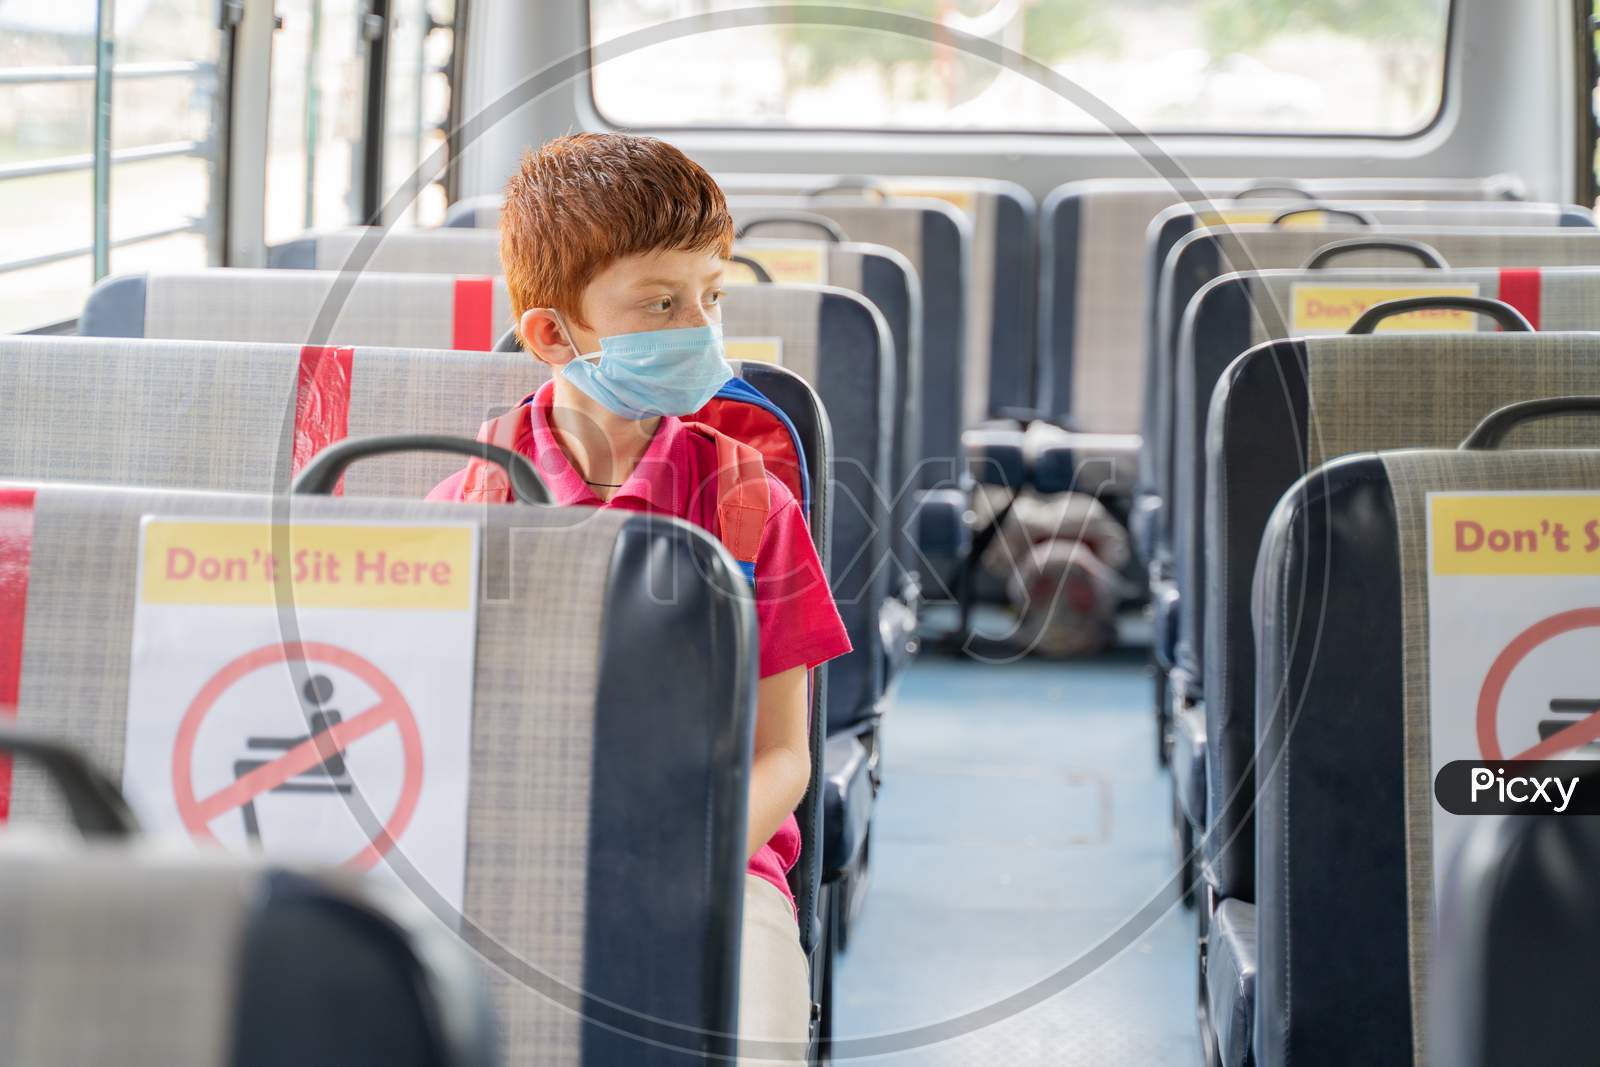 Kid Medical Mask Sitting Inside School Bus While Maintaining Social Distance Due To Coronavirus Or Covid-19 Pandemic - Concept Of School Reopen Or Back To School